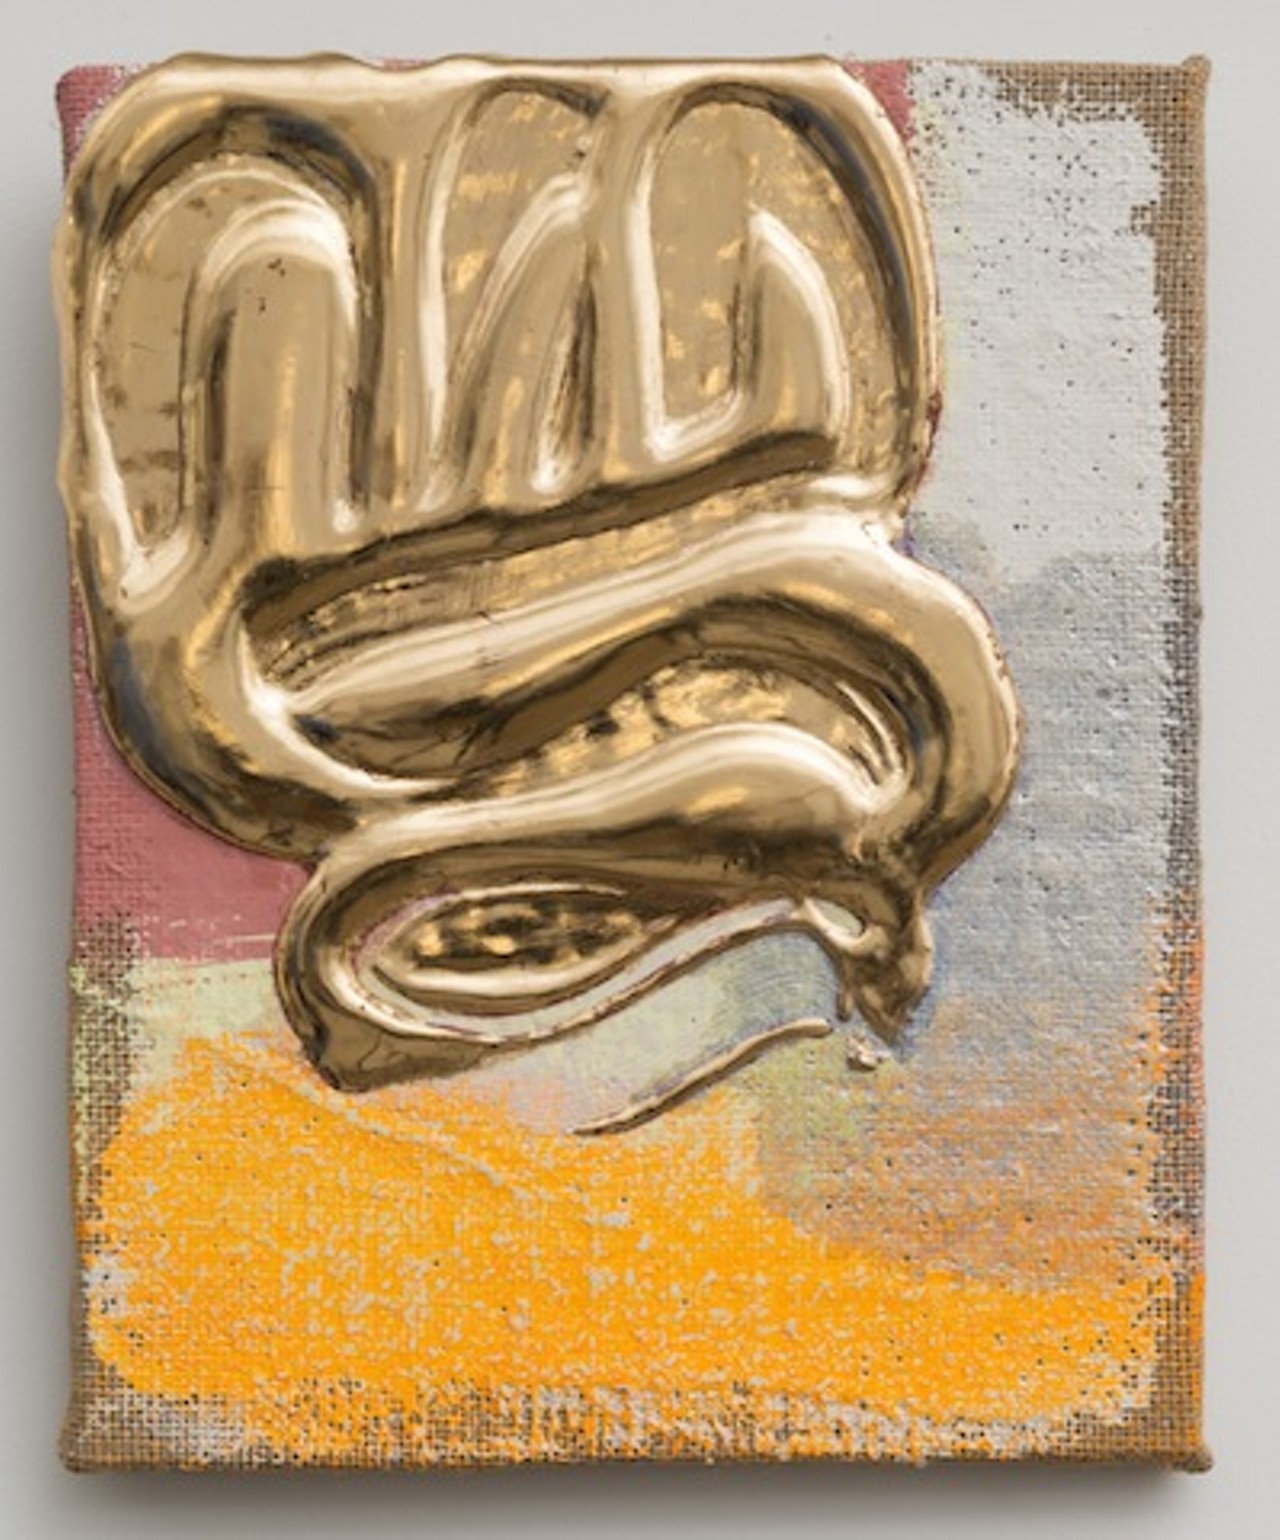 Nancy Lorenz, 'Red Gold Pour,' 2013. Gesso, gilder&#146;s clay, red gold leaf, and pigment on burlap, 10 &times; 8 in. Collection of Lucy Schwalbe. Photo courtesy of the artist.